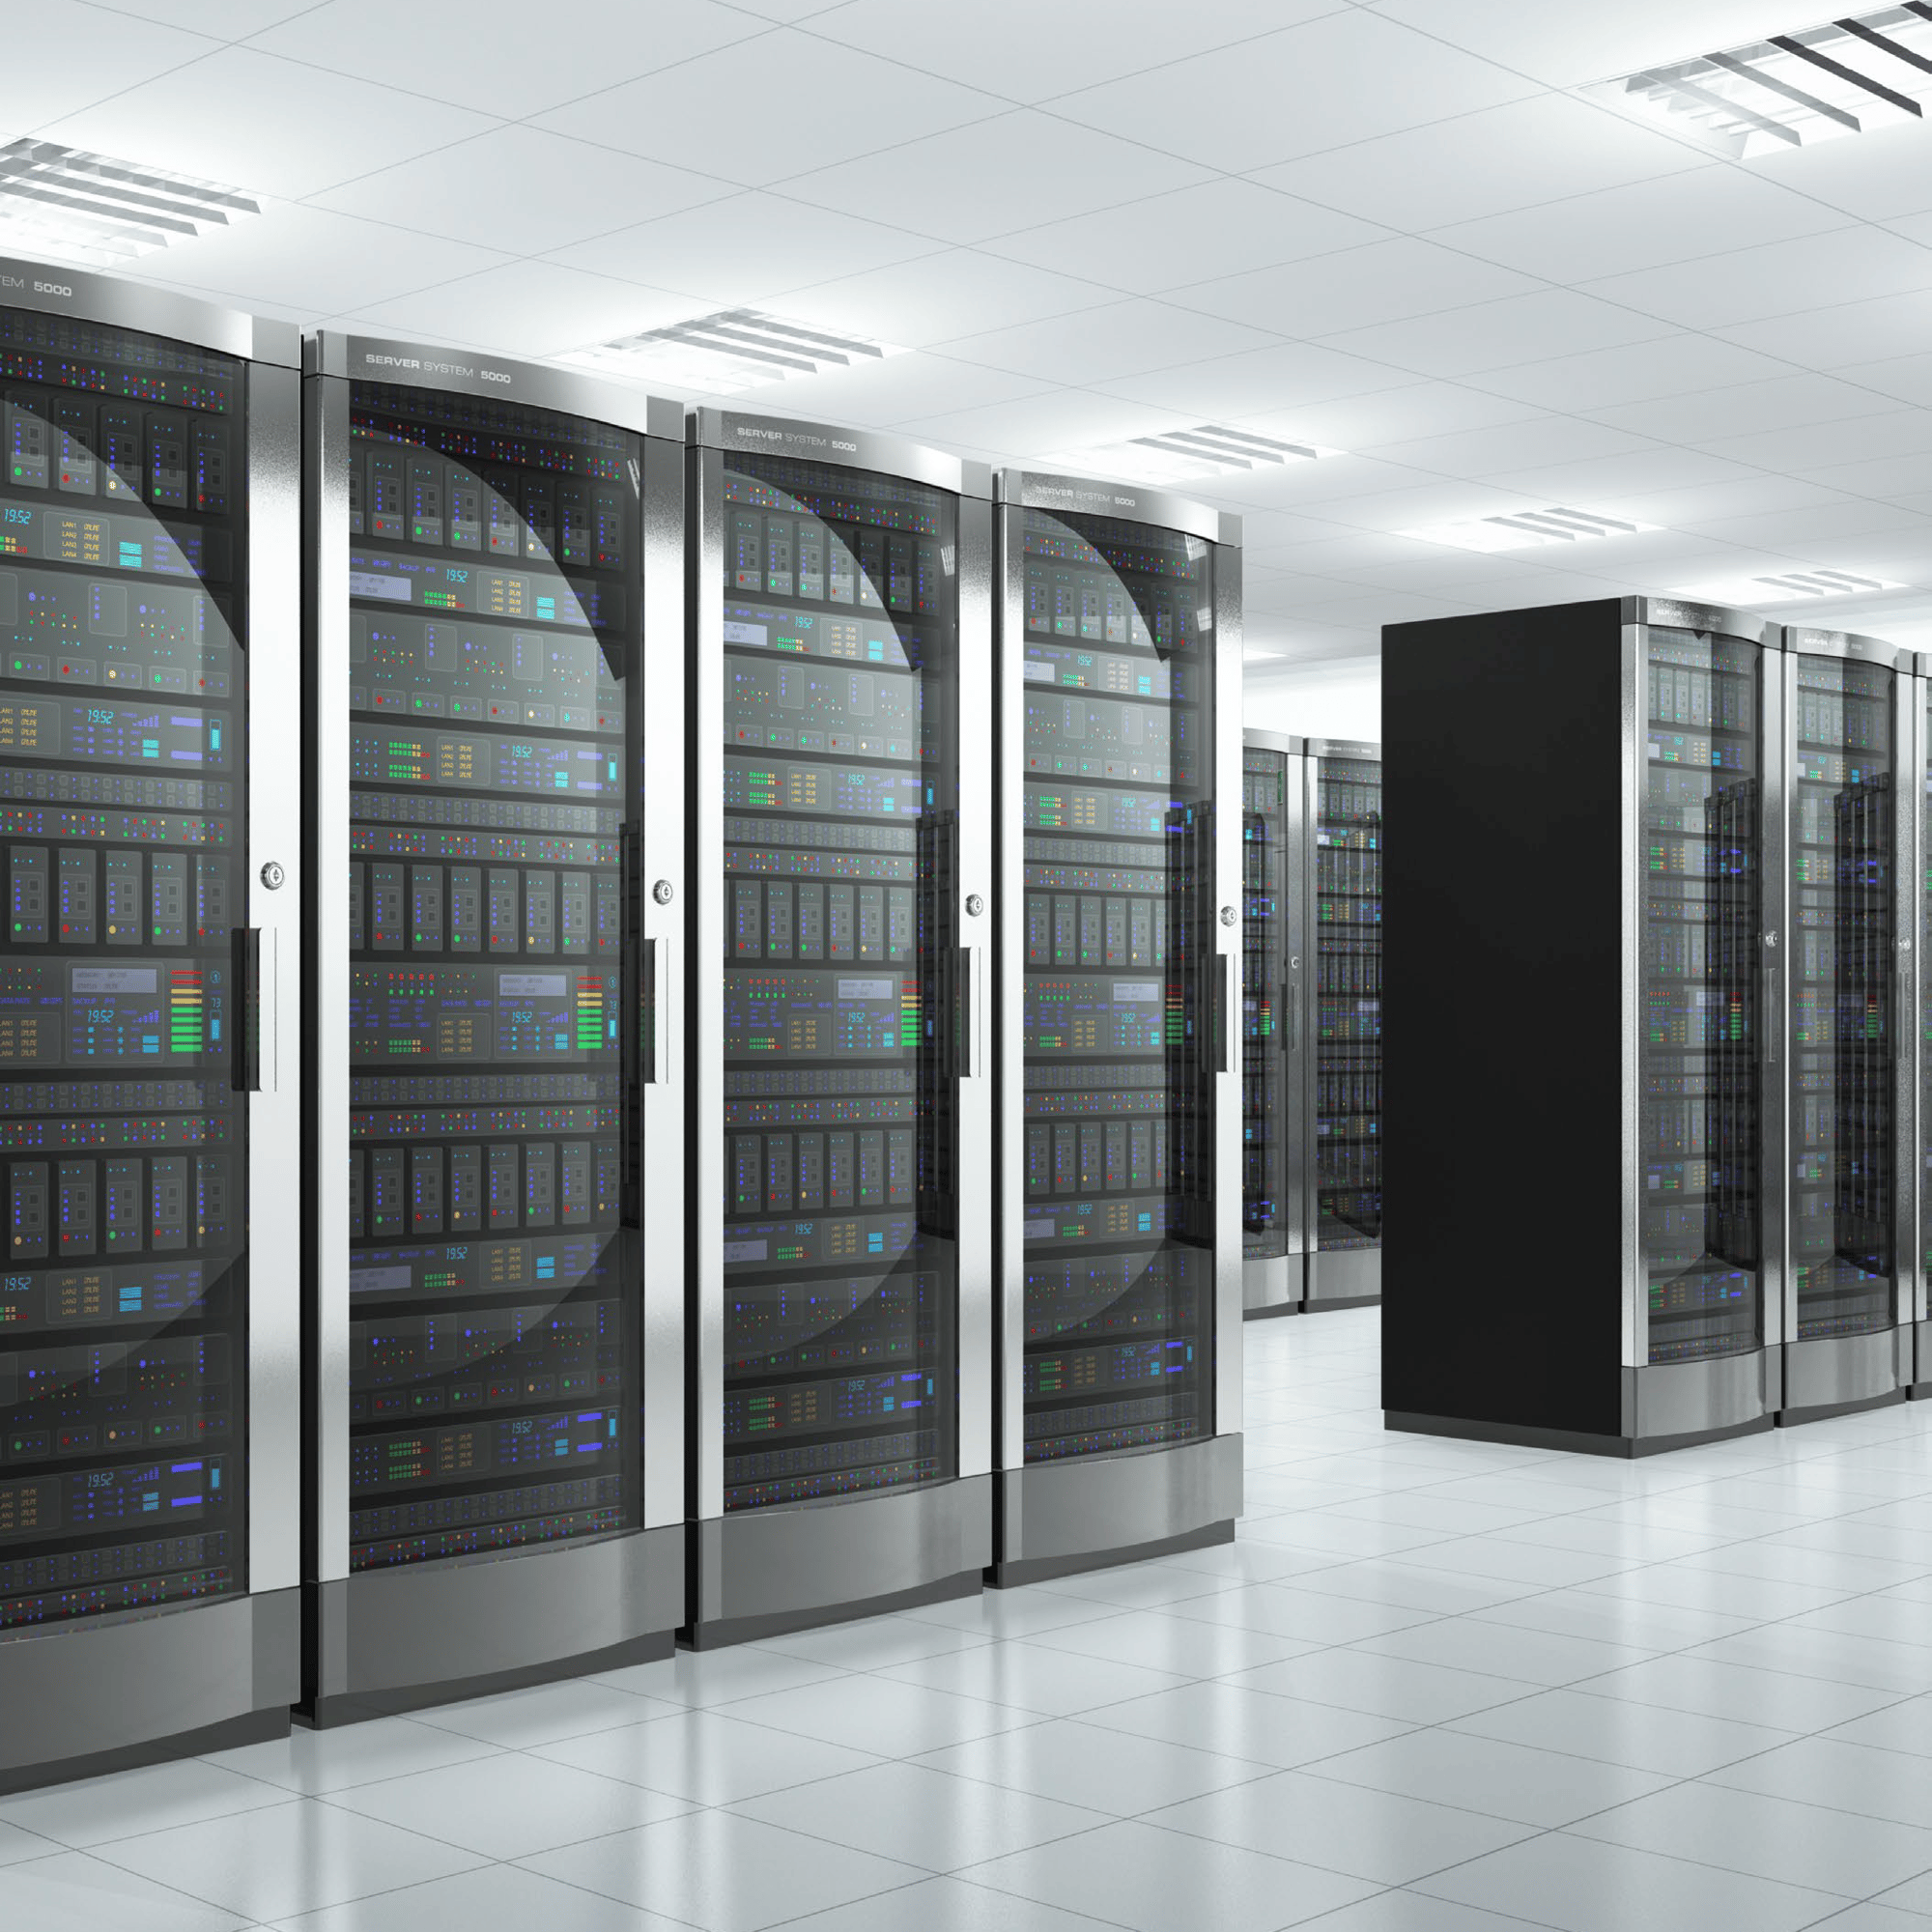 servers in a data center